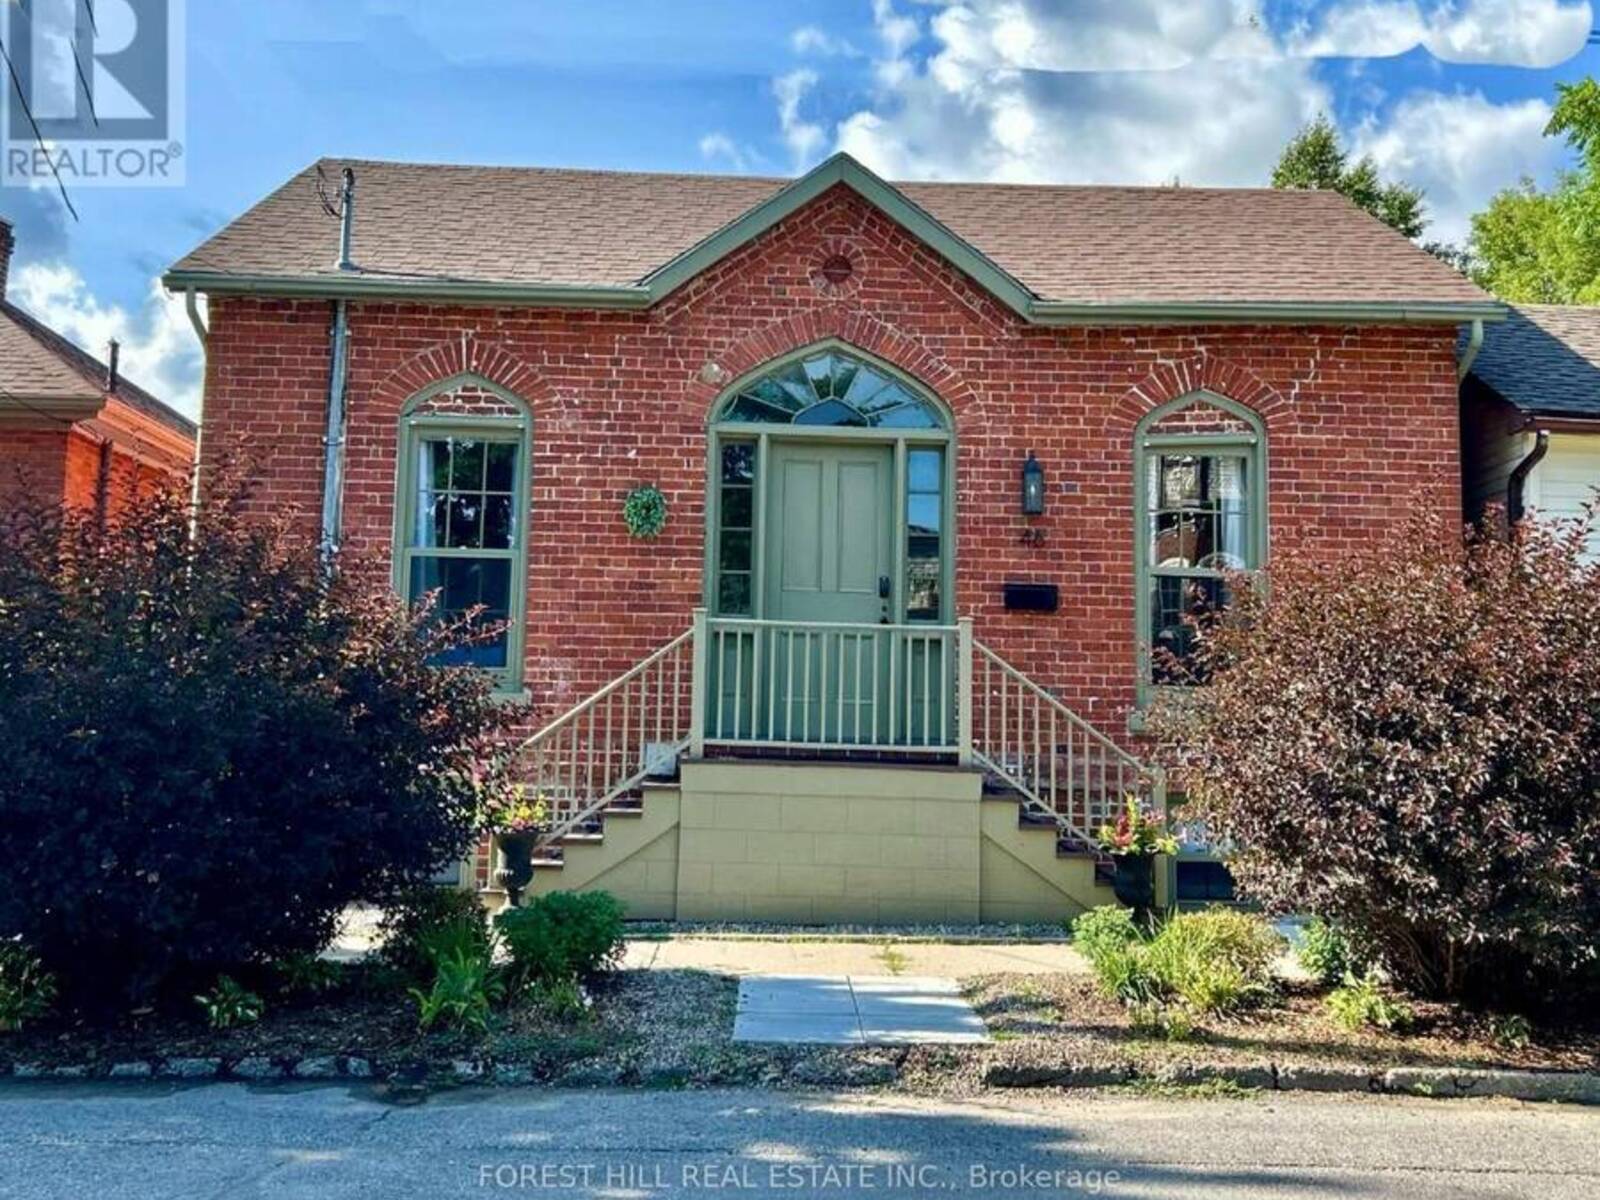 46 CHARLES ST, Port Hope, Ontario L1A 1S4